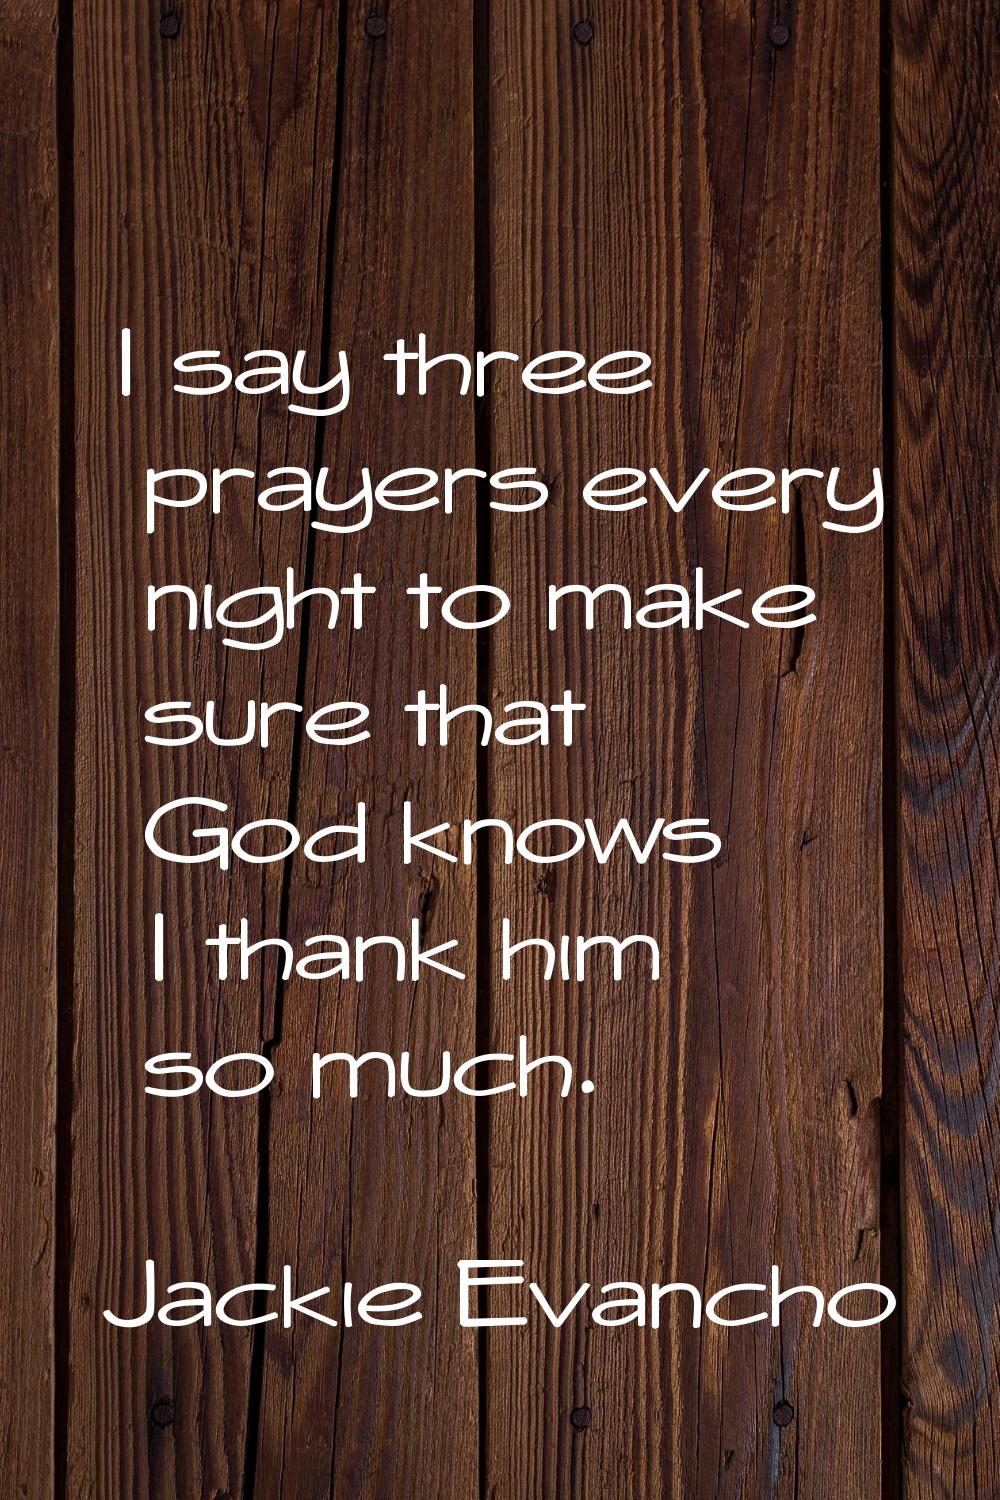 I say three prayers every night to make sure that God knows I thank him so much.